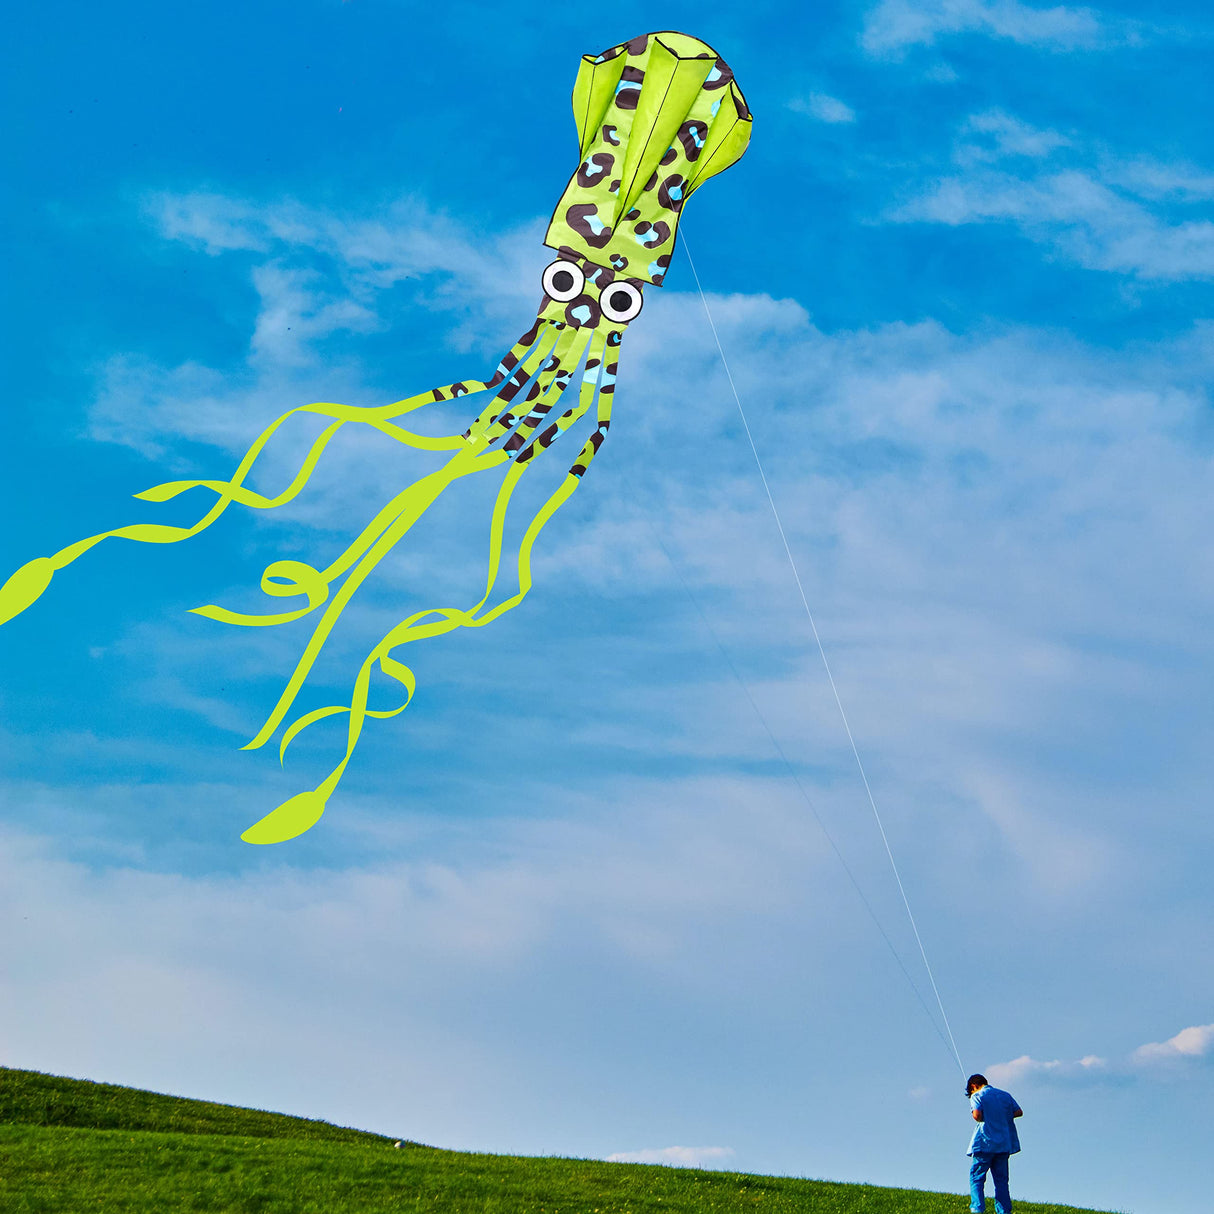 JEKOSEN Octopus Squid Huge Kite, with Total Length of 242" Easy to Fly Suitable for Children and Adults Beach Park Activities - GexWorldwide